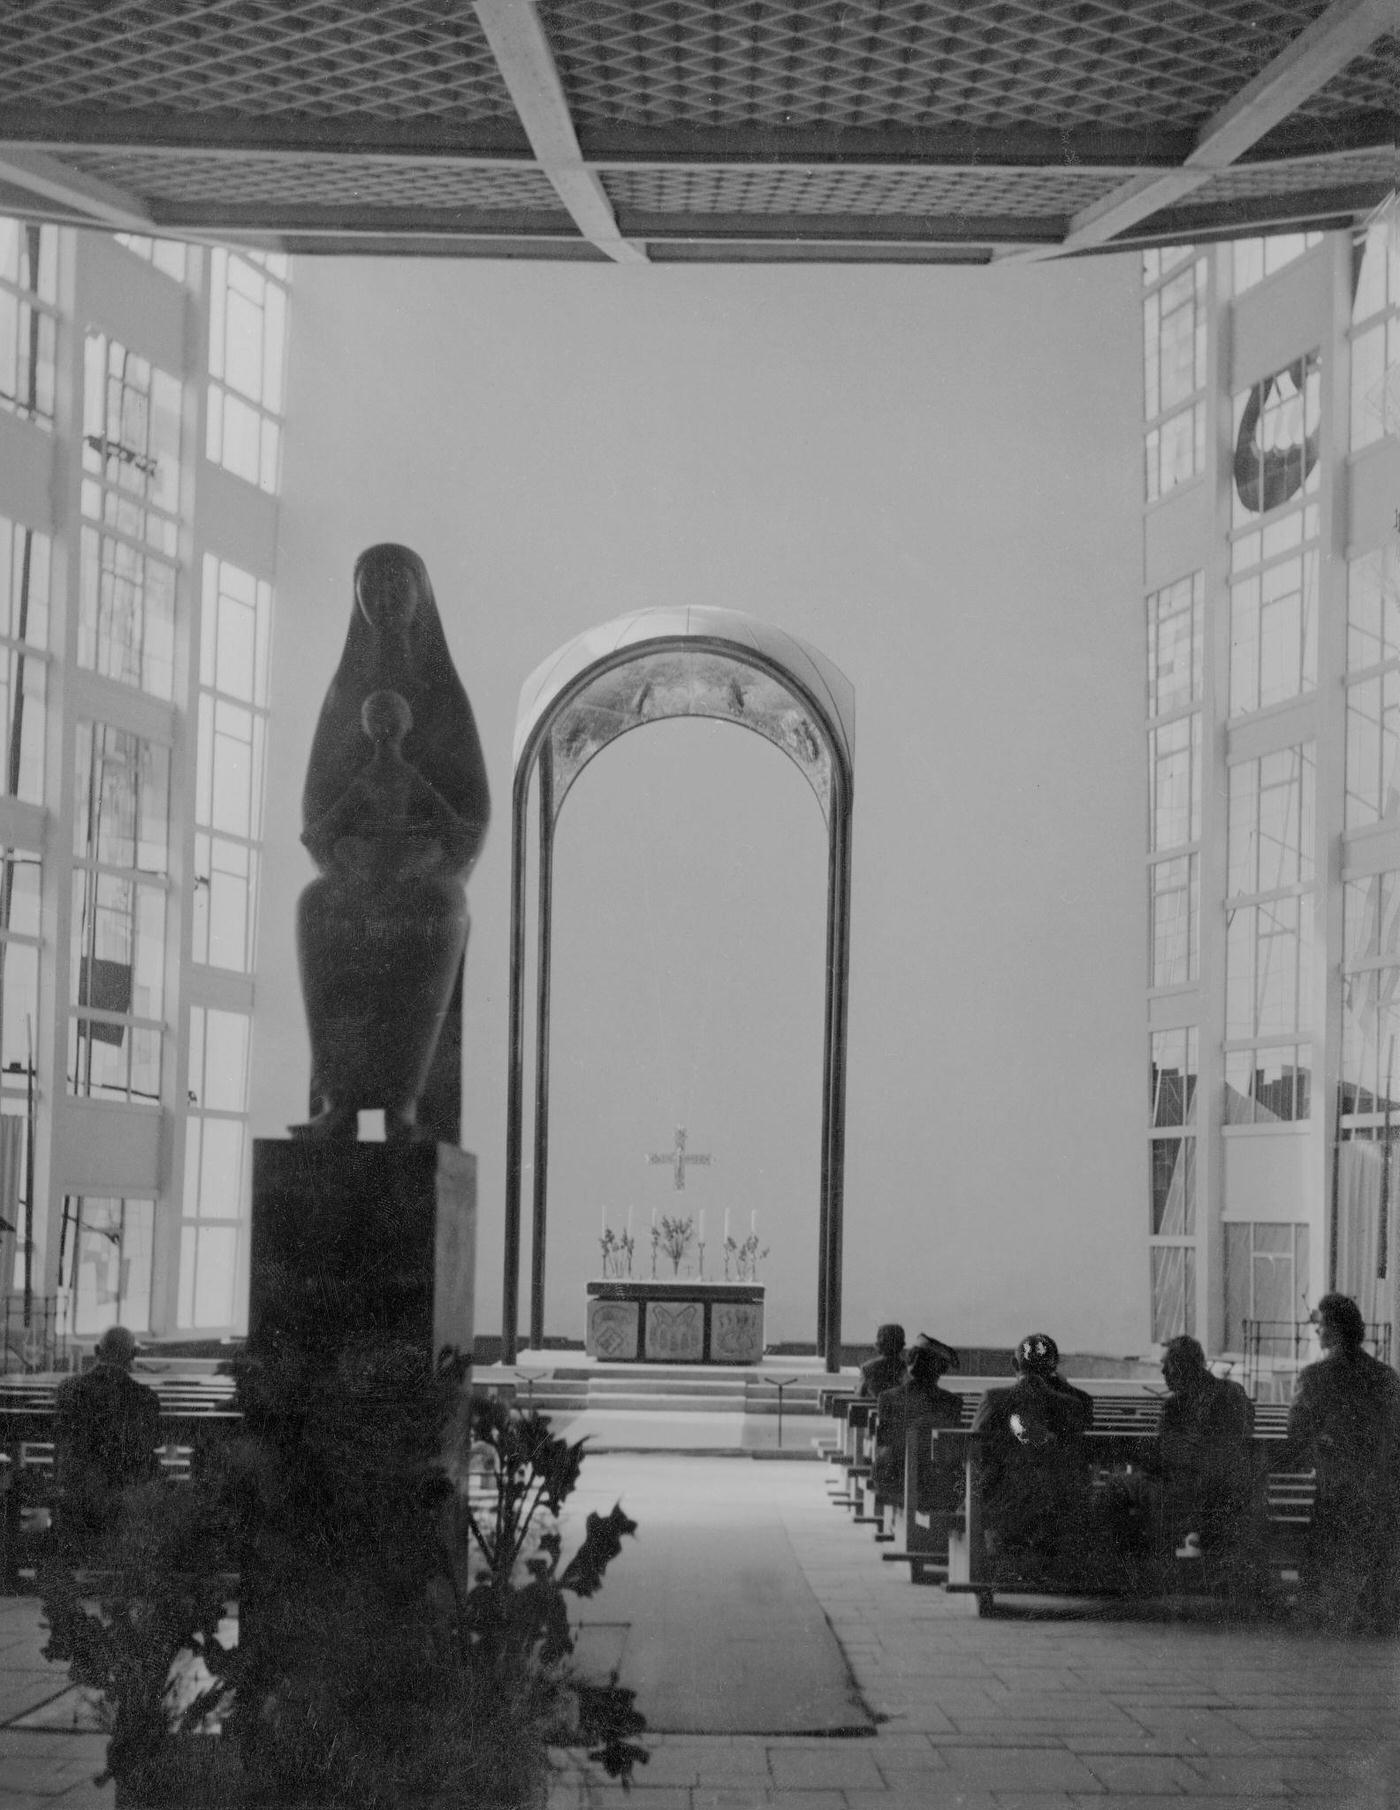 Pavilion of the Vatican, modern church, interior view